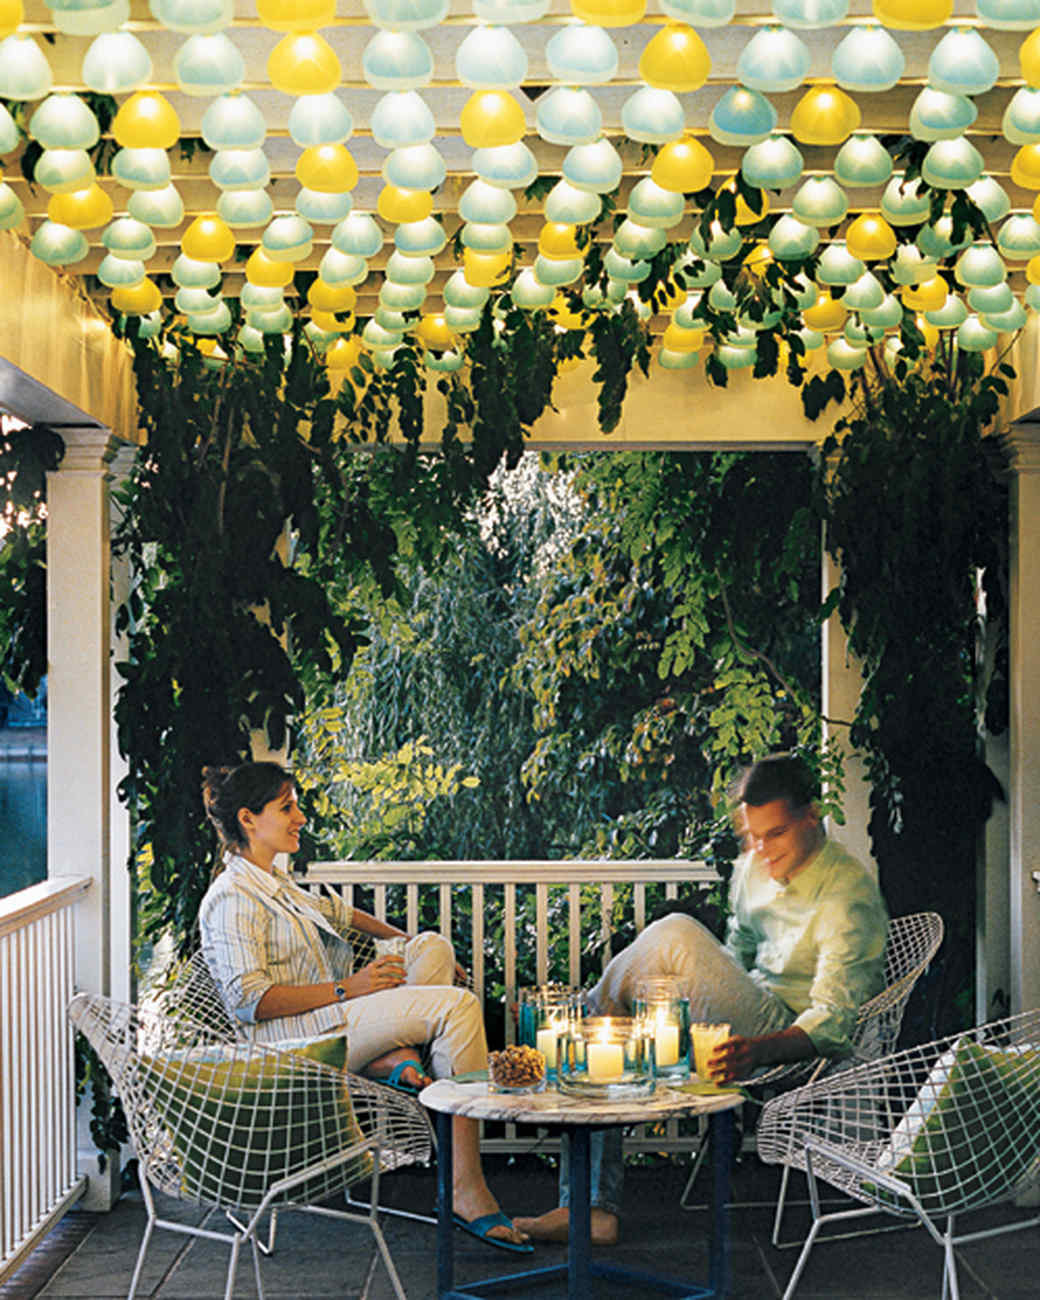 Backyard Lighting Ideas For A Party
 Outdoor Party Decorations